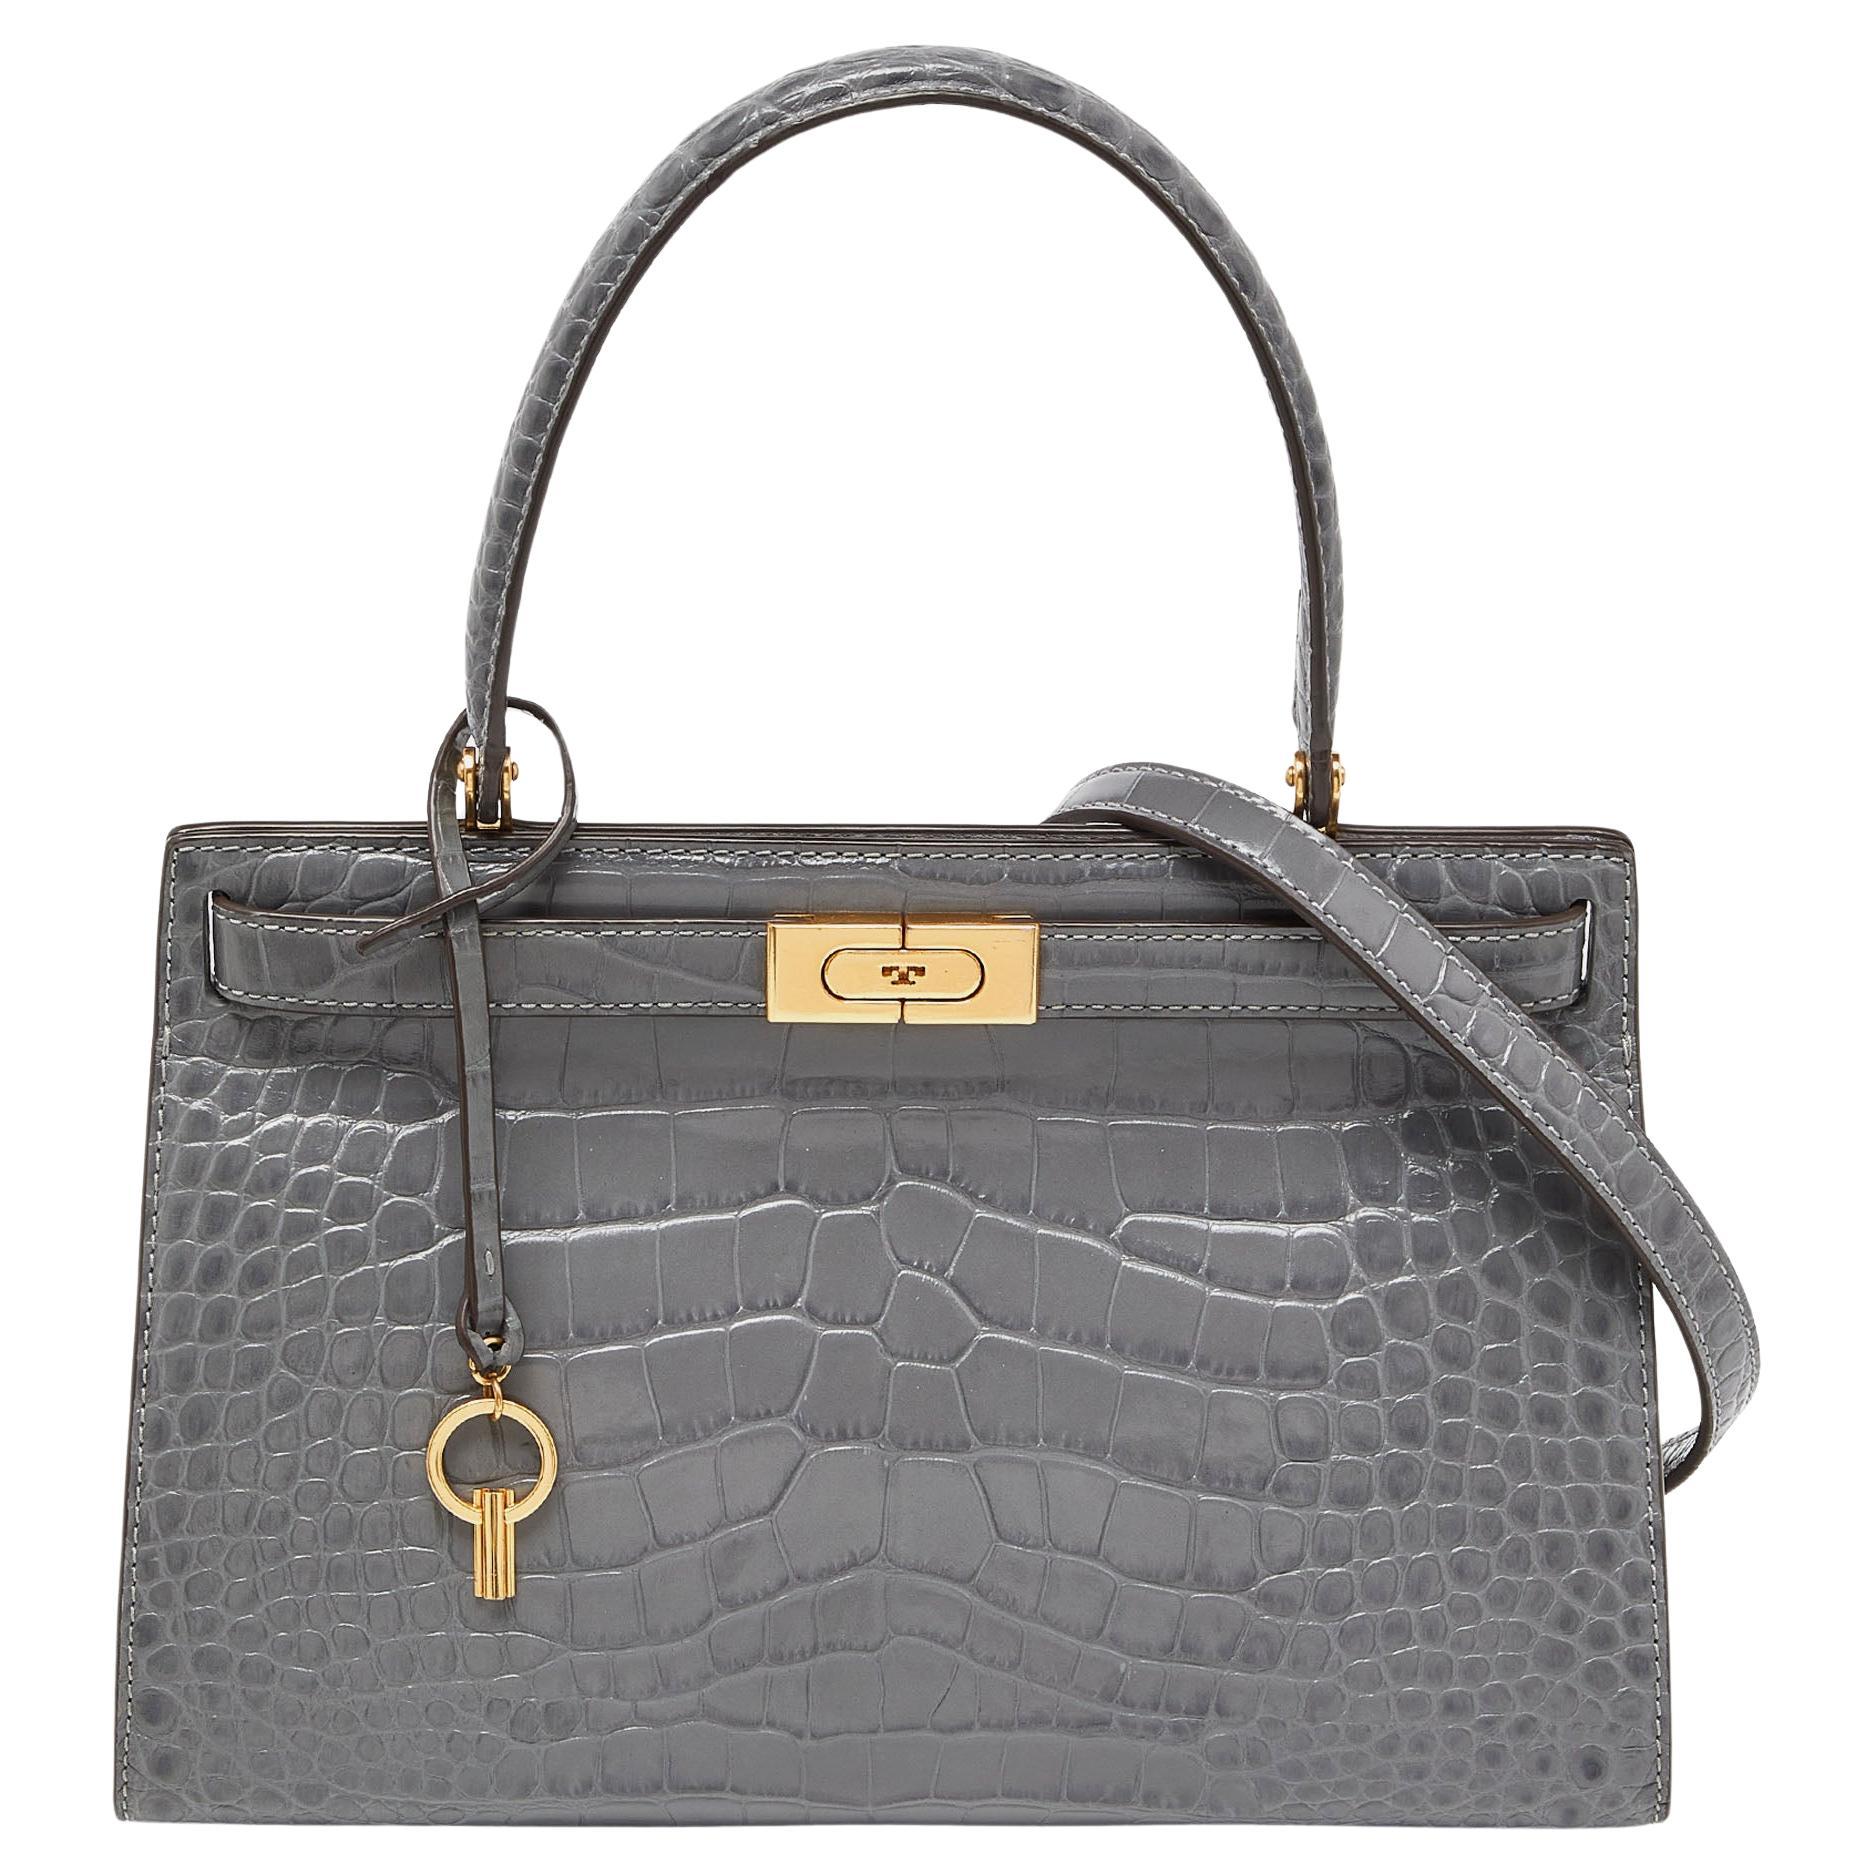 Tory Burch Grey Croc Embossed Leather Small Lee Radziwill Top Handle Bag For Sale